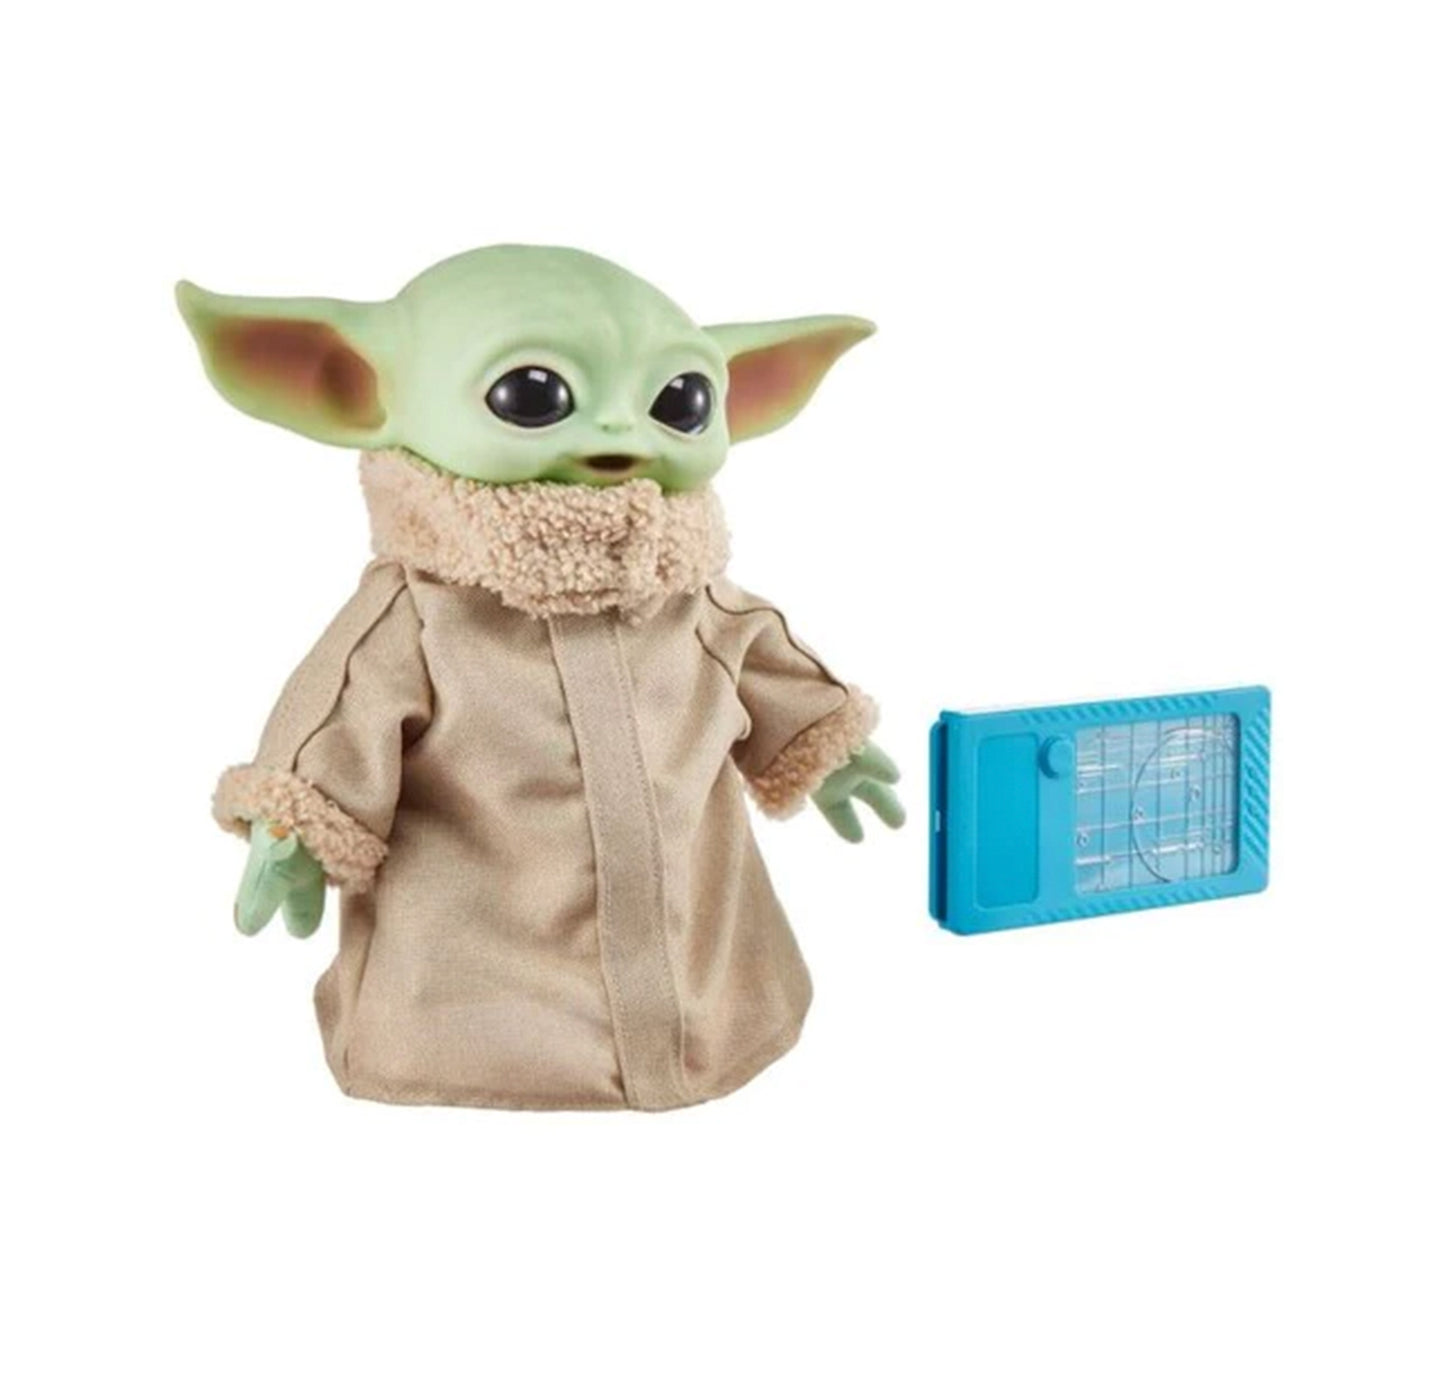 The Child,Baby Yoda, Grogu Plush with Tablet: A cute plush toy of Grogu, with a light up star map on a tablet.